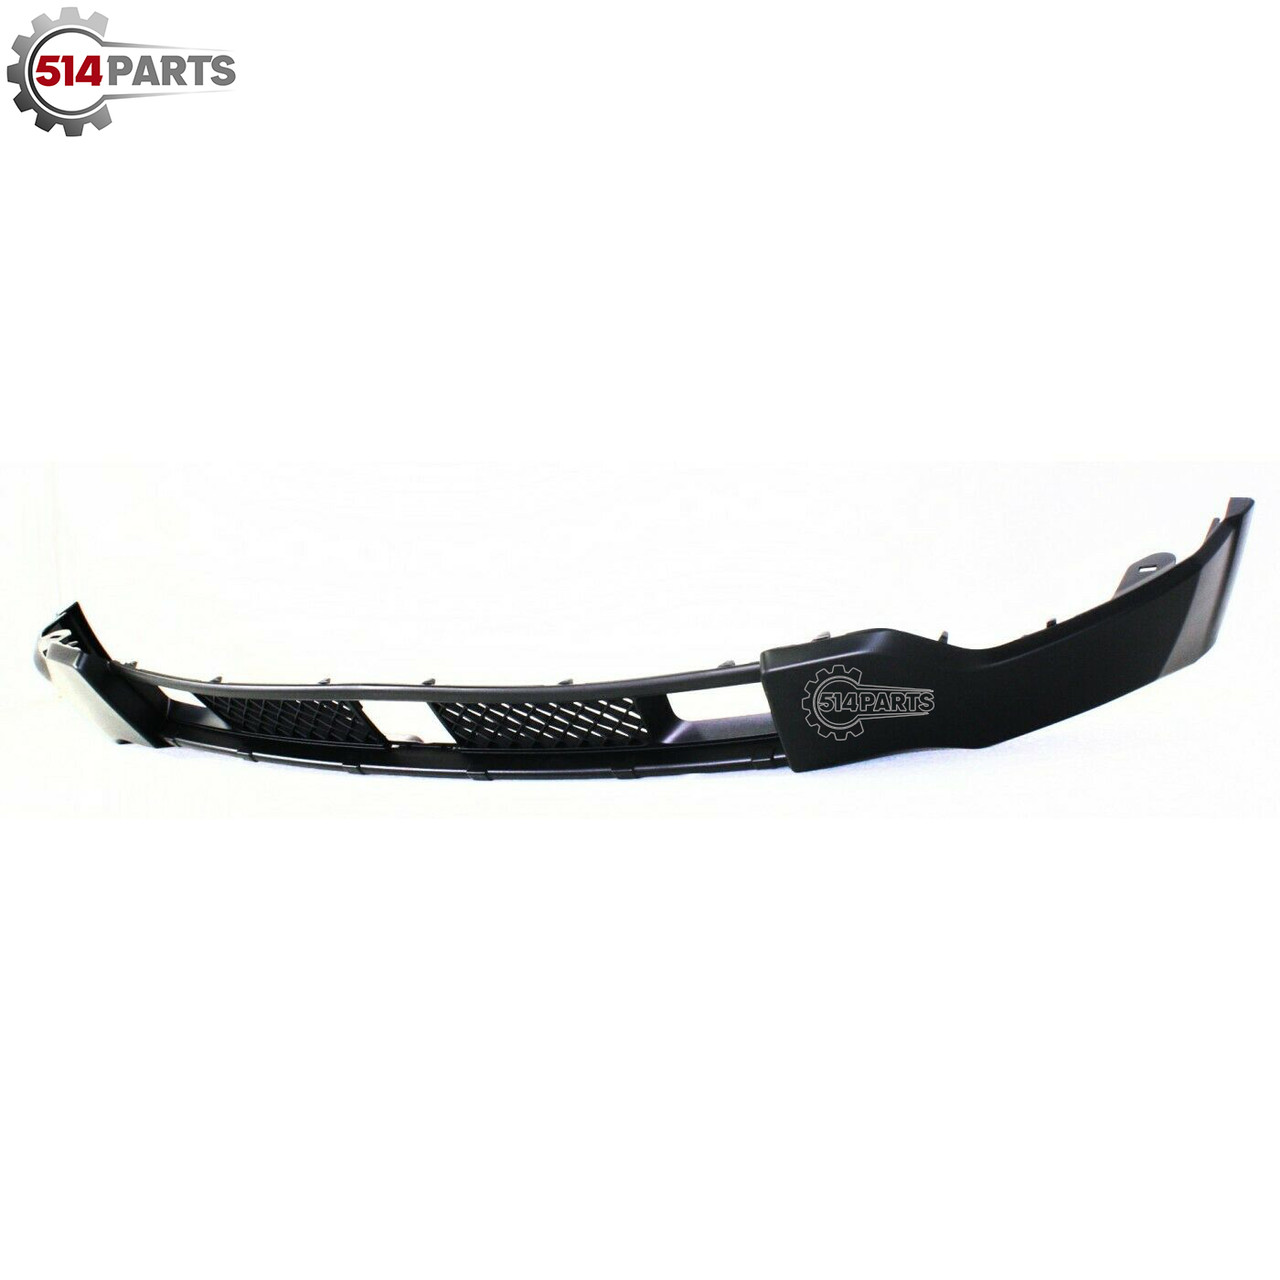 2011 - 2013 JEEP GRAND CHEROKEE FRONT LOWER BUMPER COVER with  3 HOLES in GRILLE[for TOW HOOKS/ADAPTIVE SPEED CONTROL] - PARE-CHOC AVANT INFERIEUR